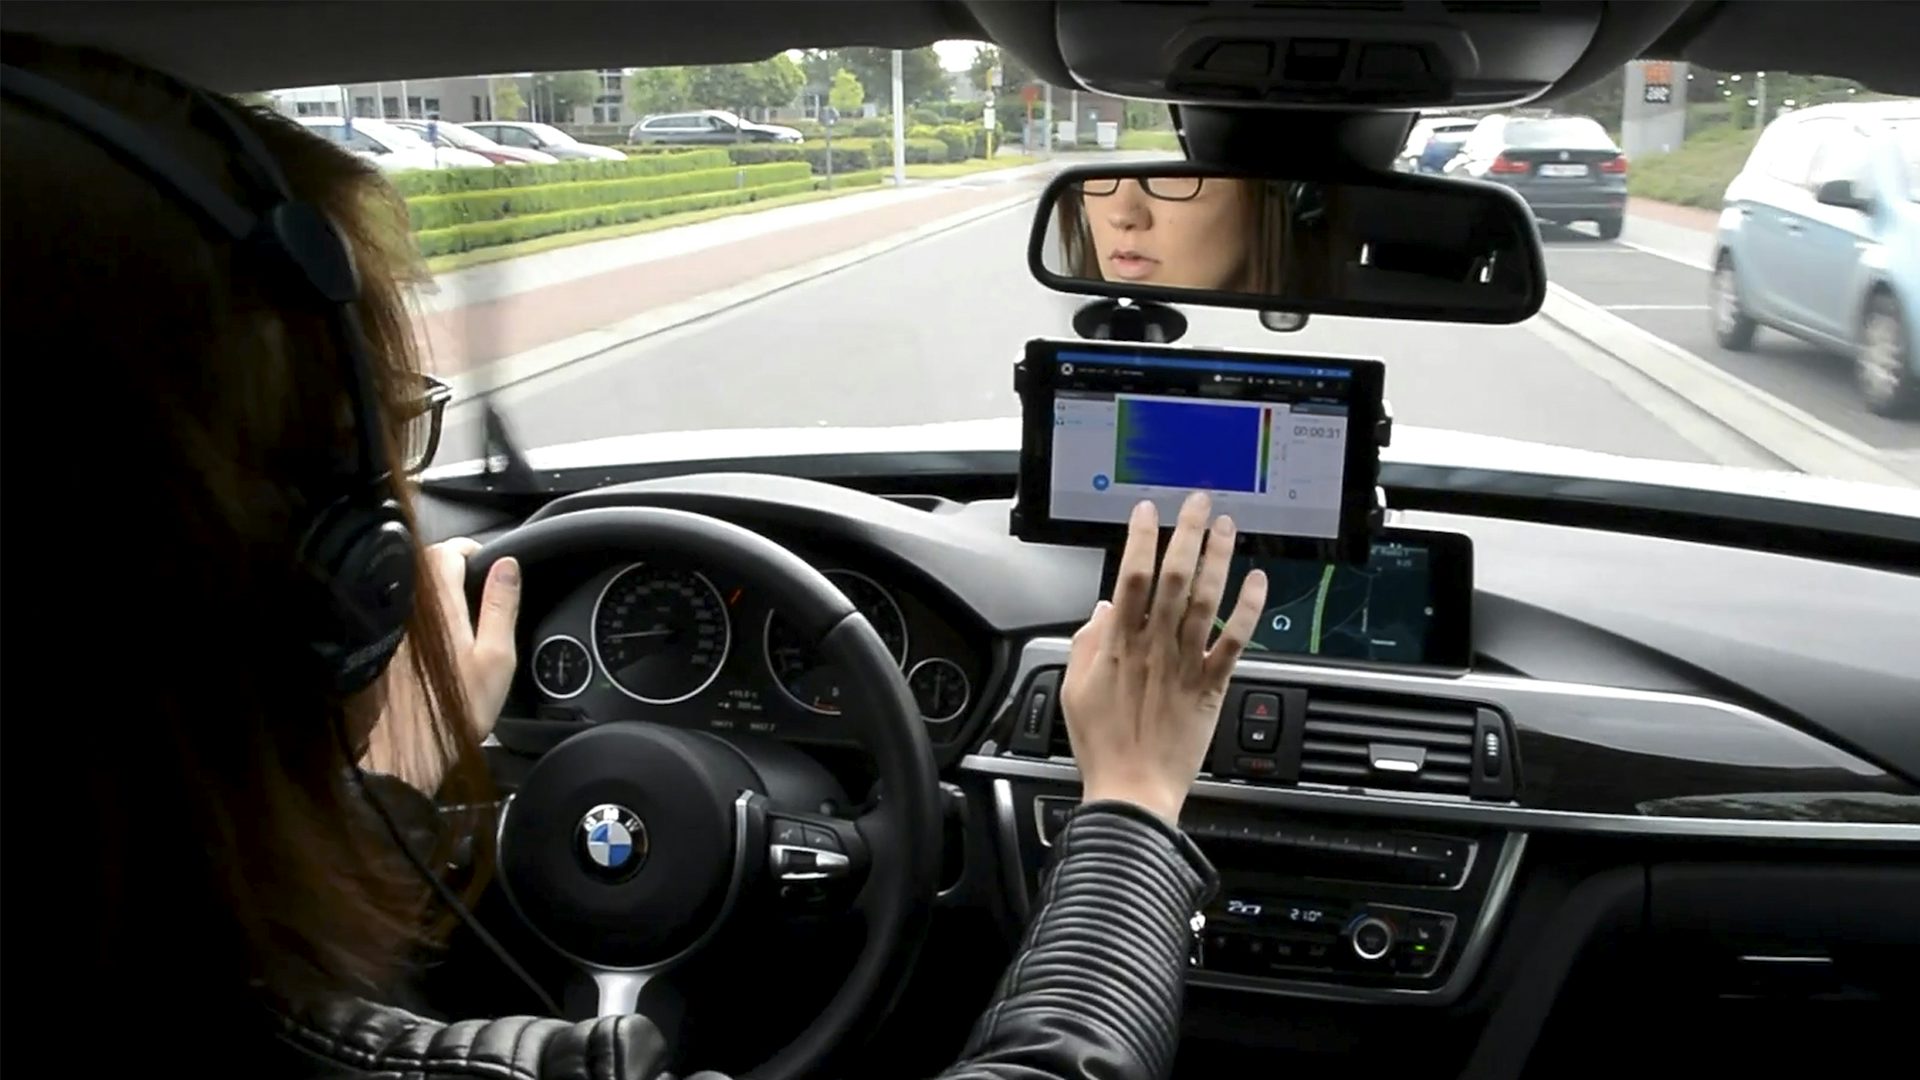 A woman driving a car while running an operational NVH testing on a device.